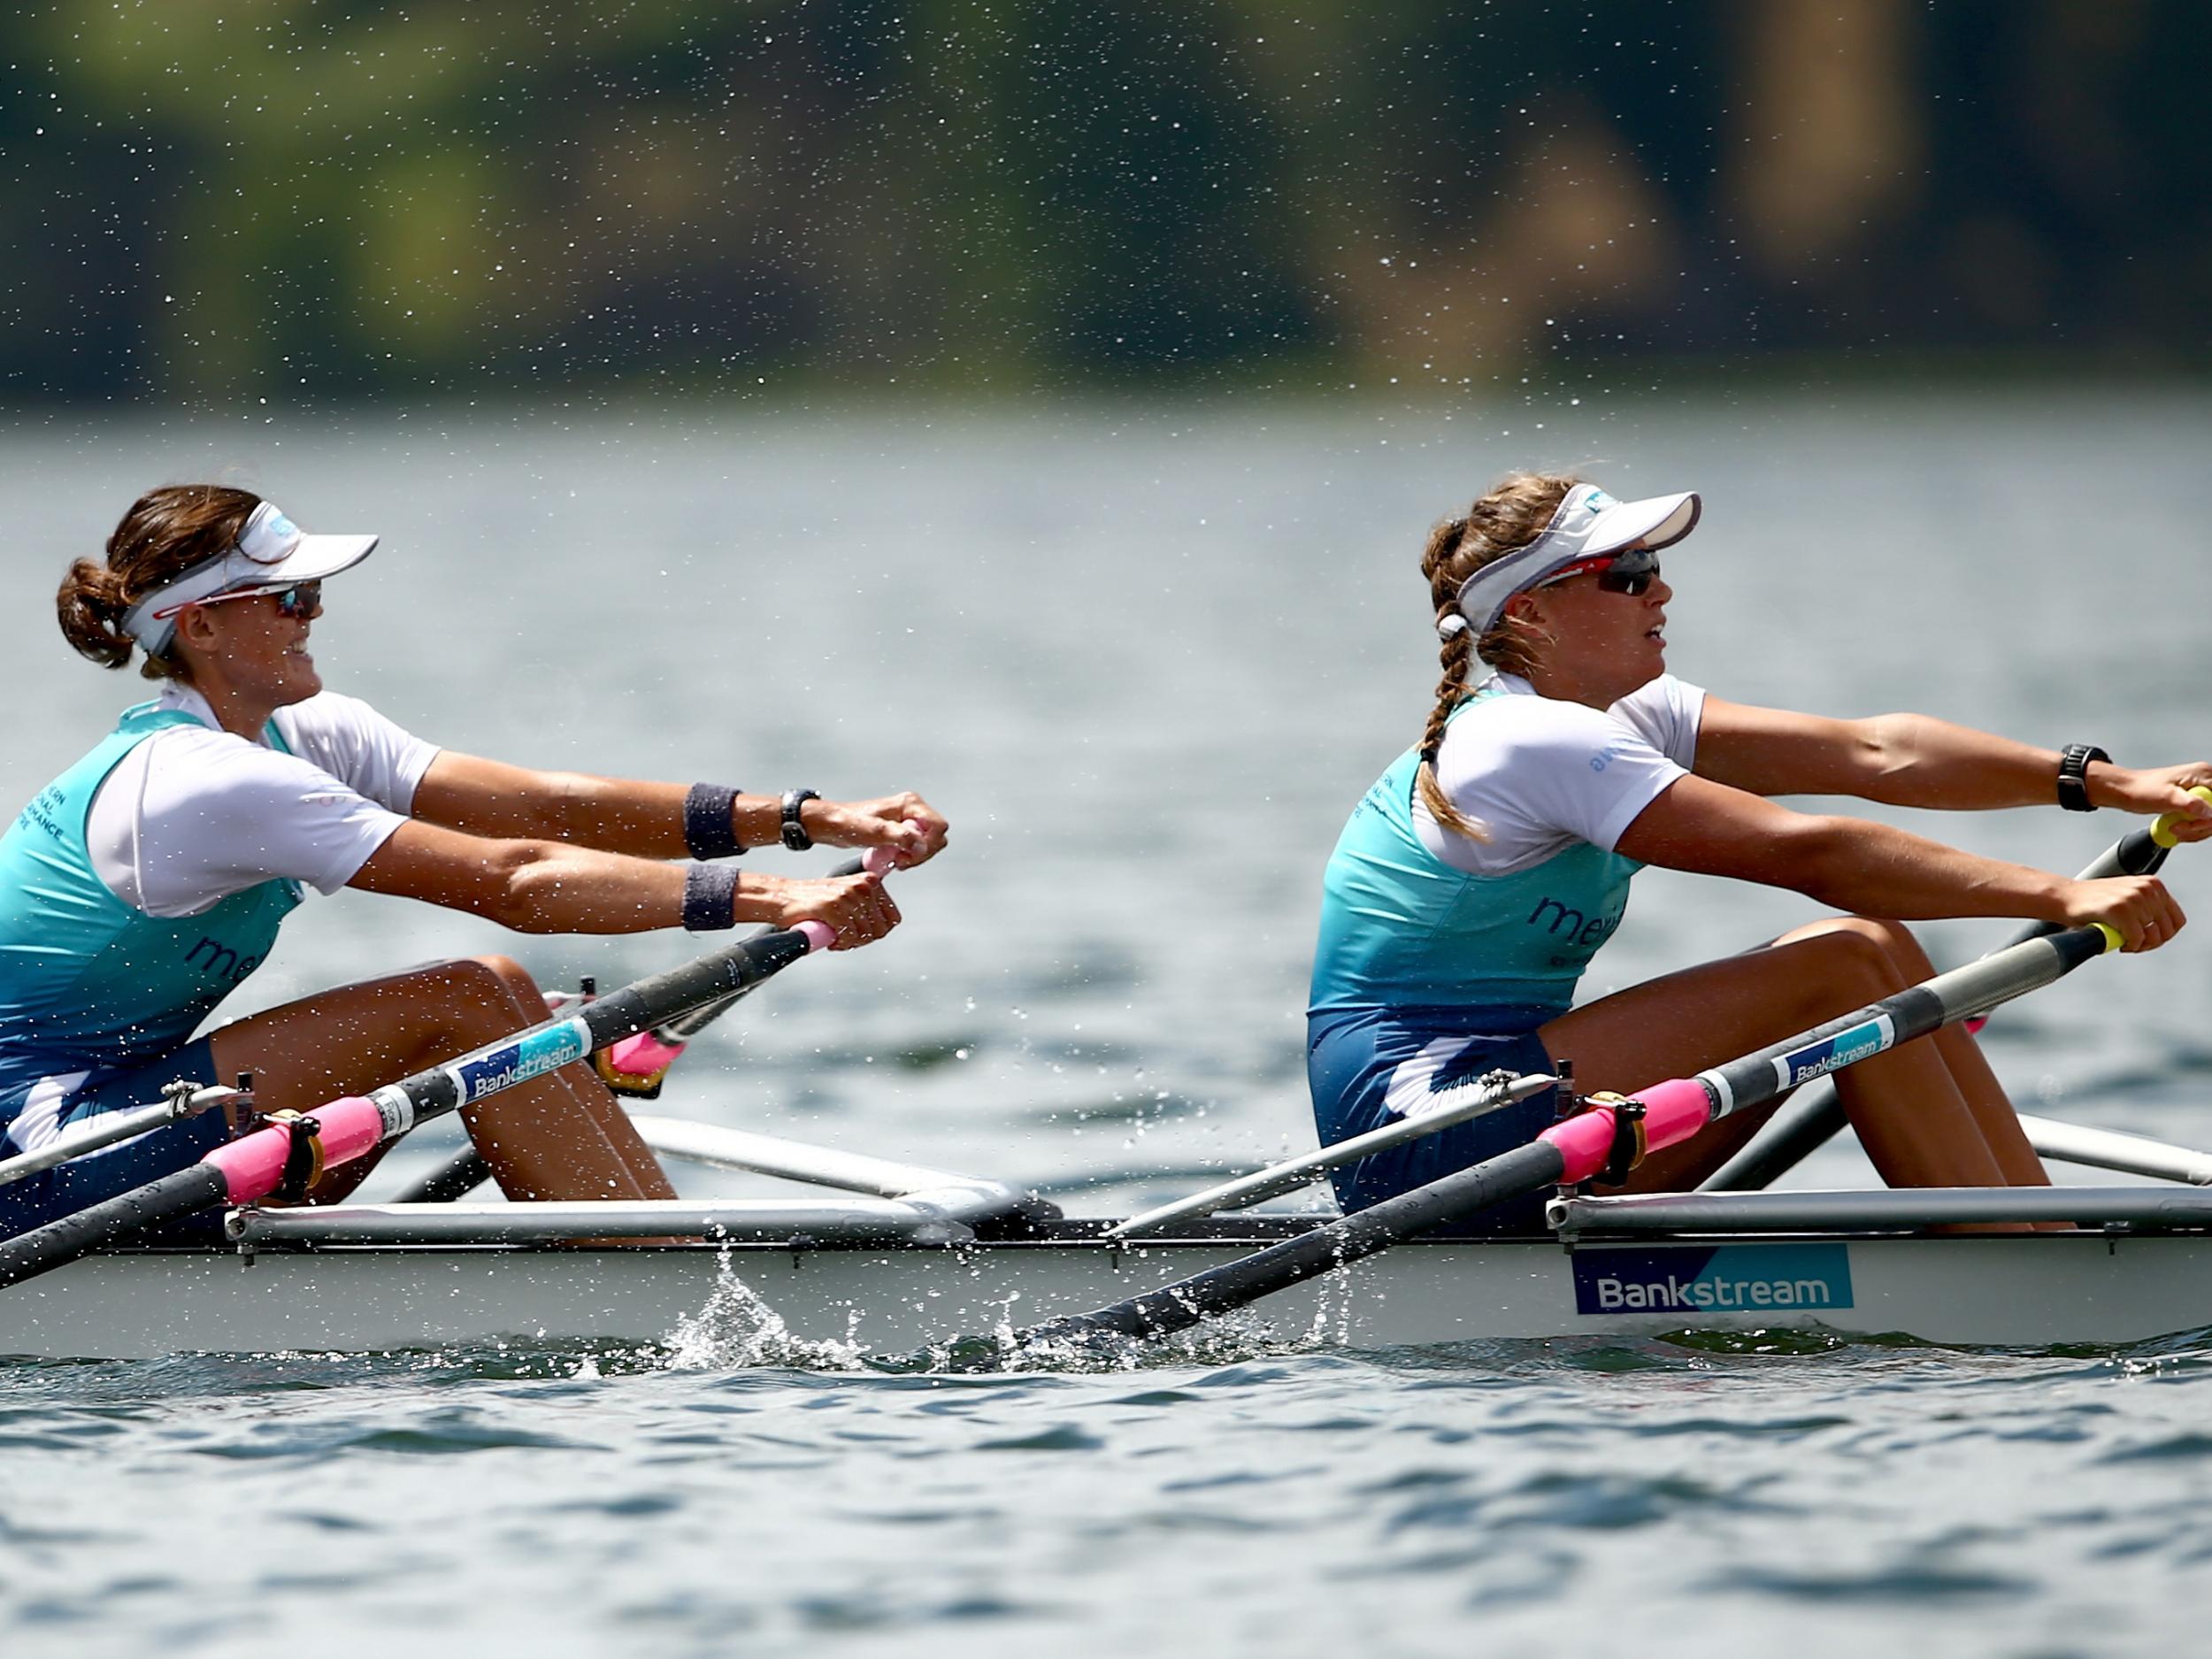 Analysis of ancient female bones has revealed that prehistoric women had stronger arms than elite rowers today